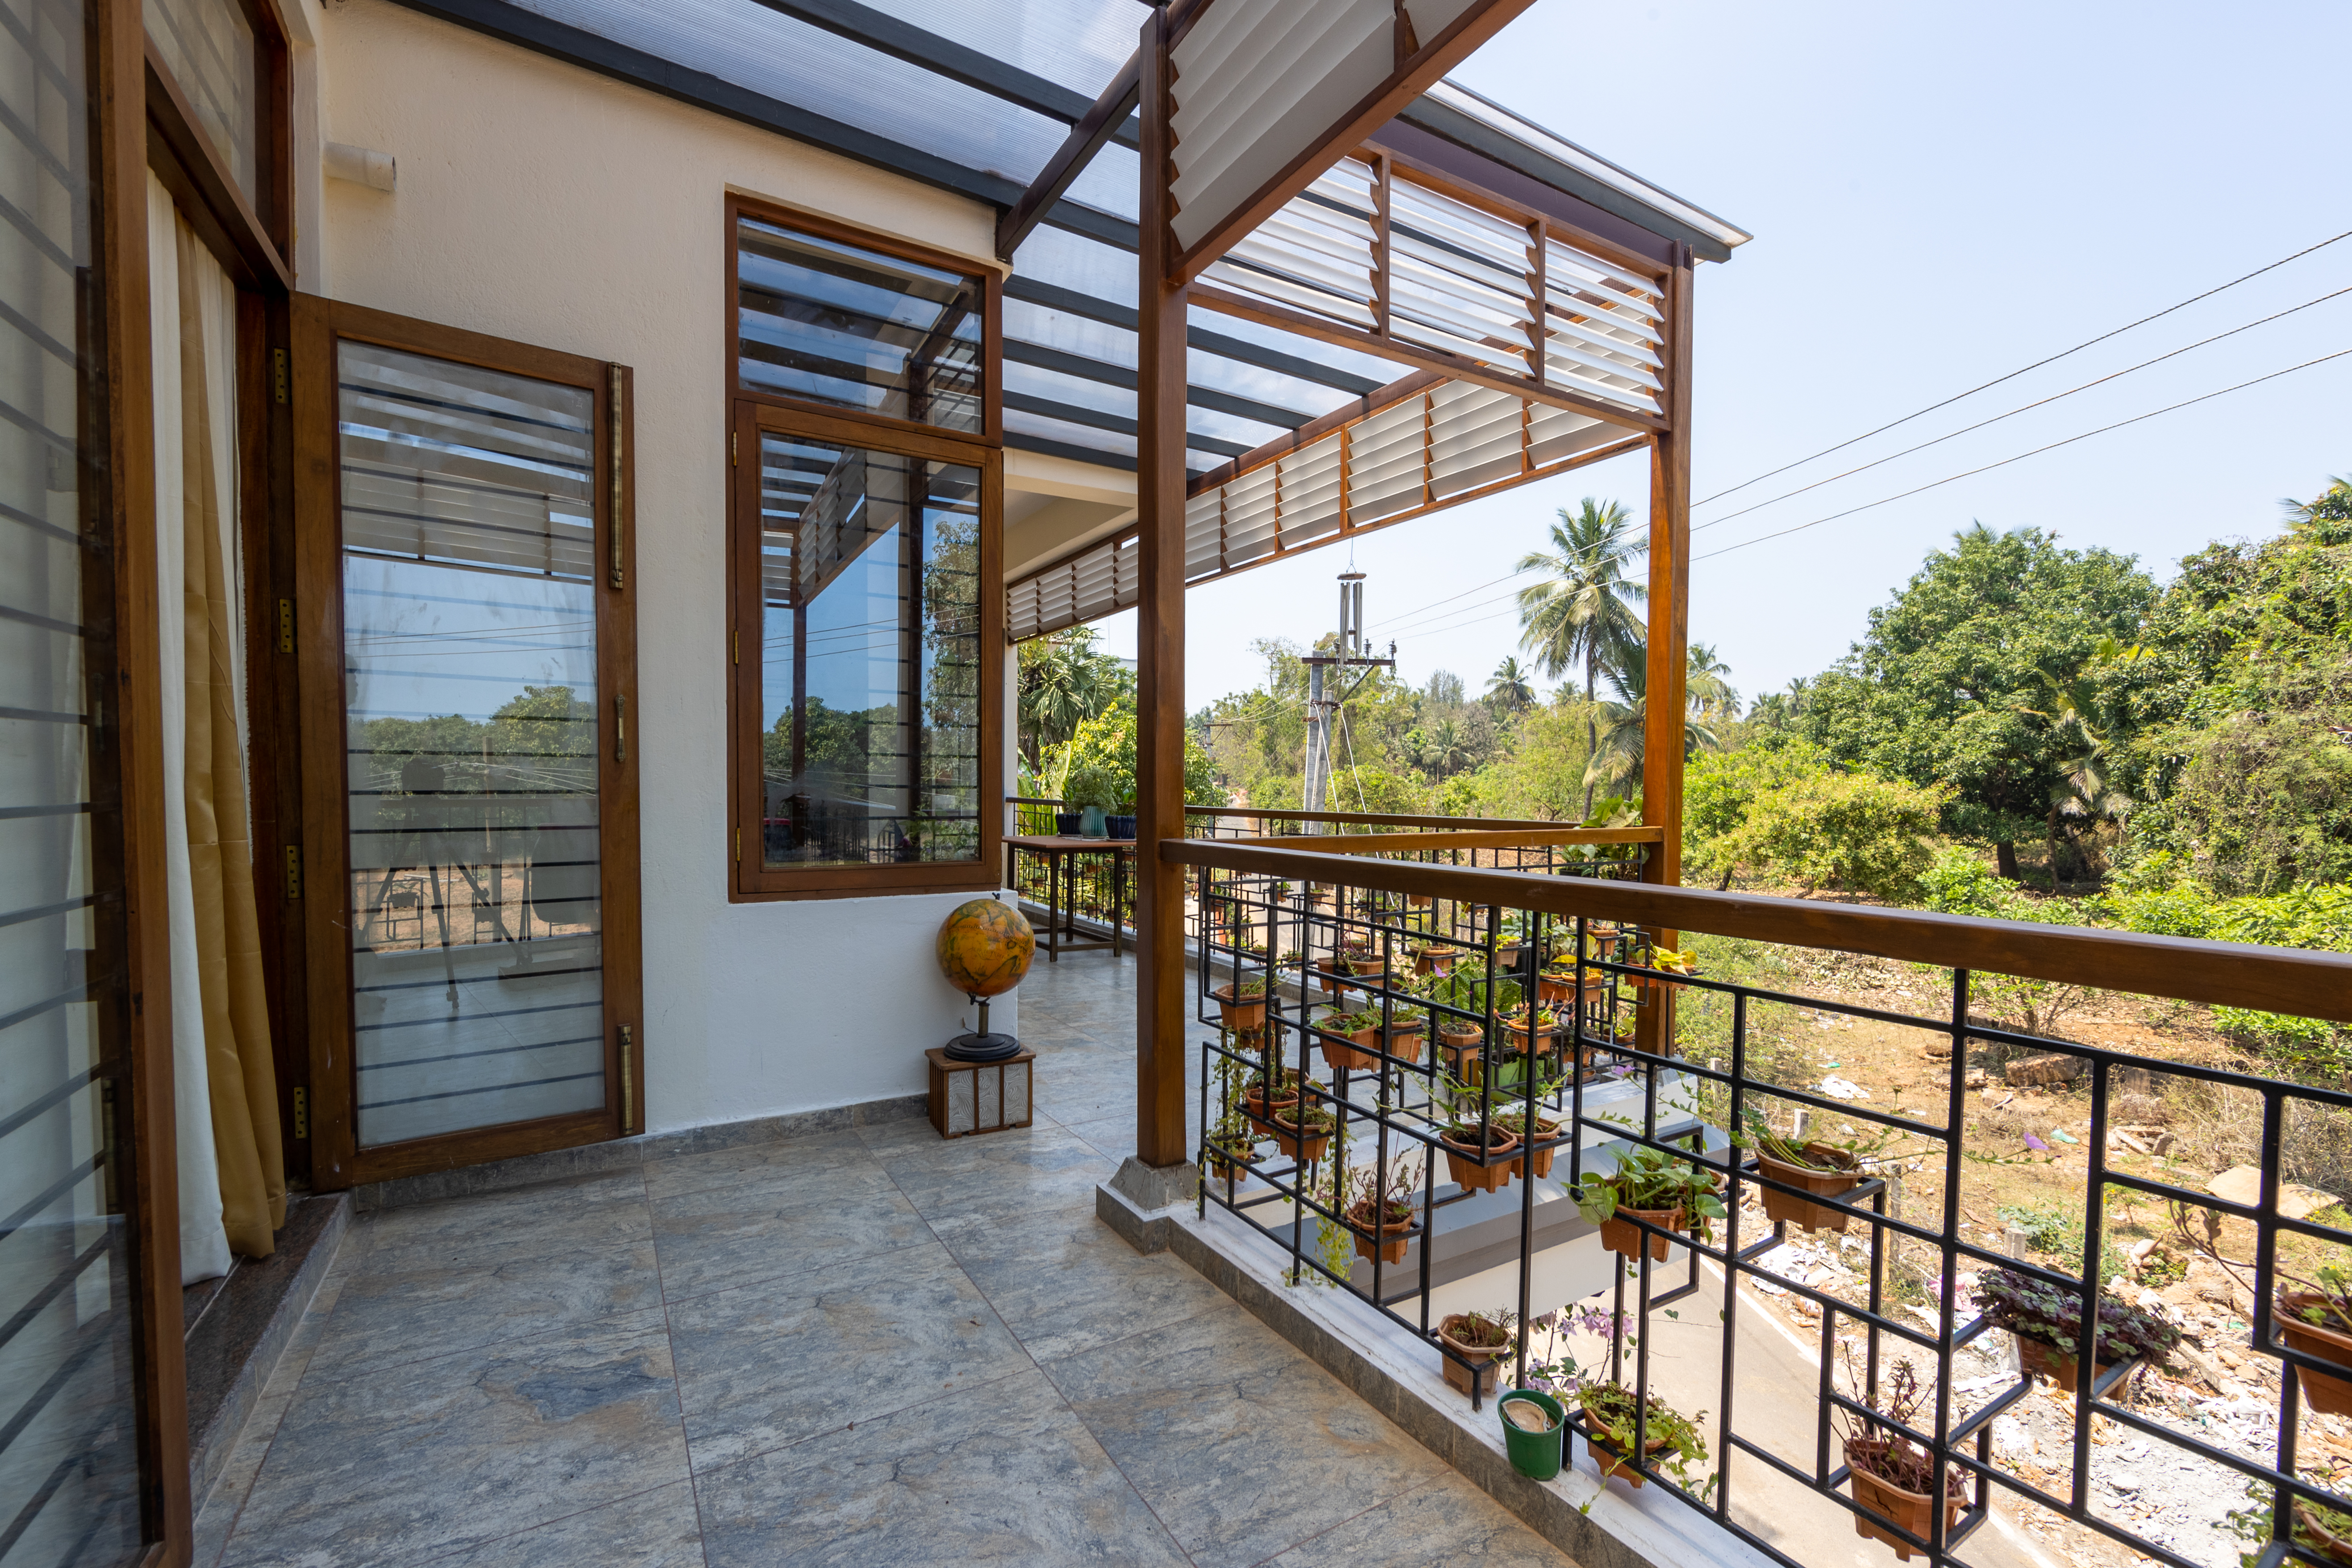 ACC builds the first ‘Gratitude EcoVilla’ in India made fully with sustainable materials, as part of its global “Houses of Tomorrow” initiative